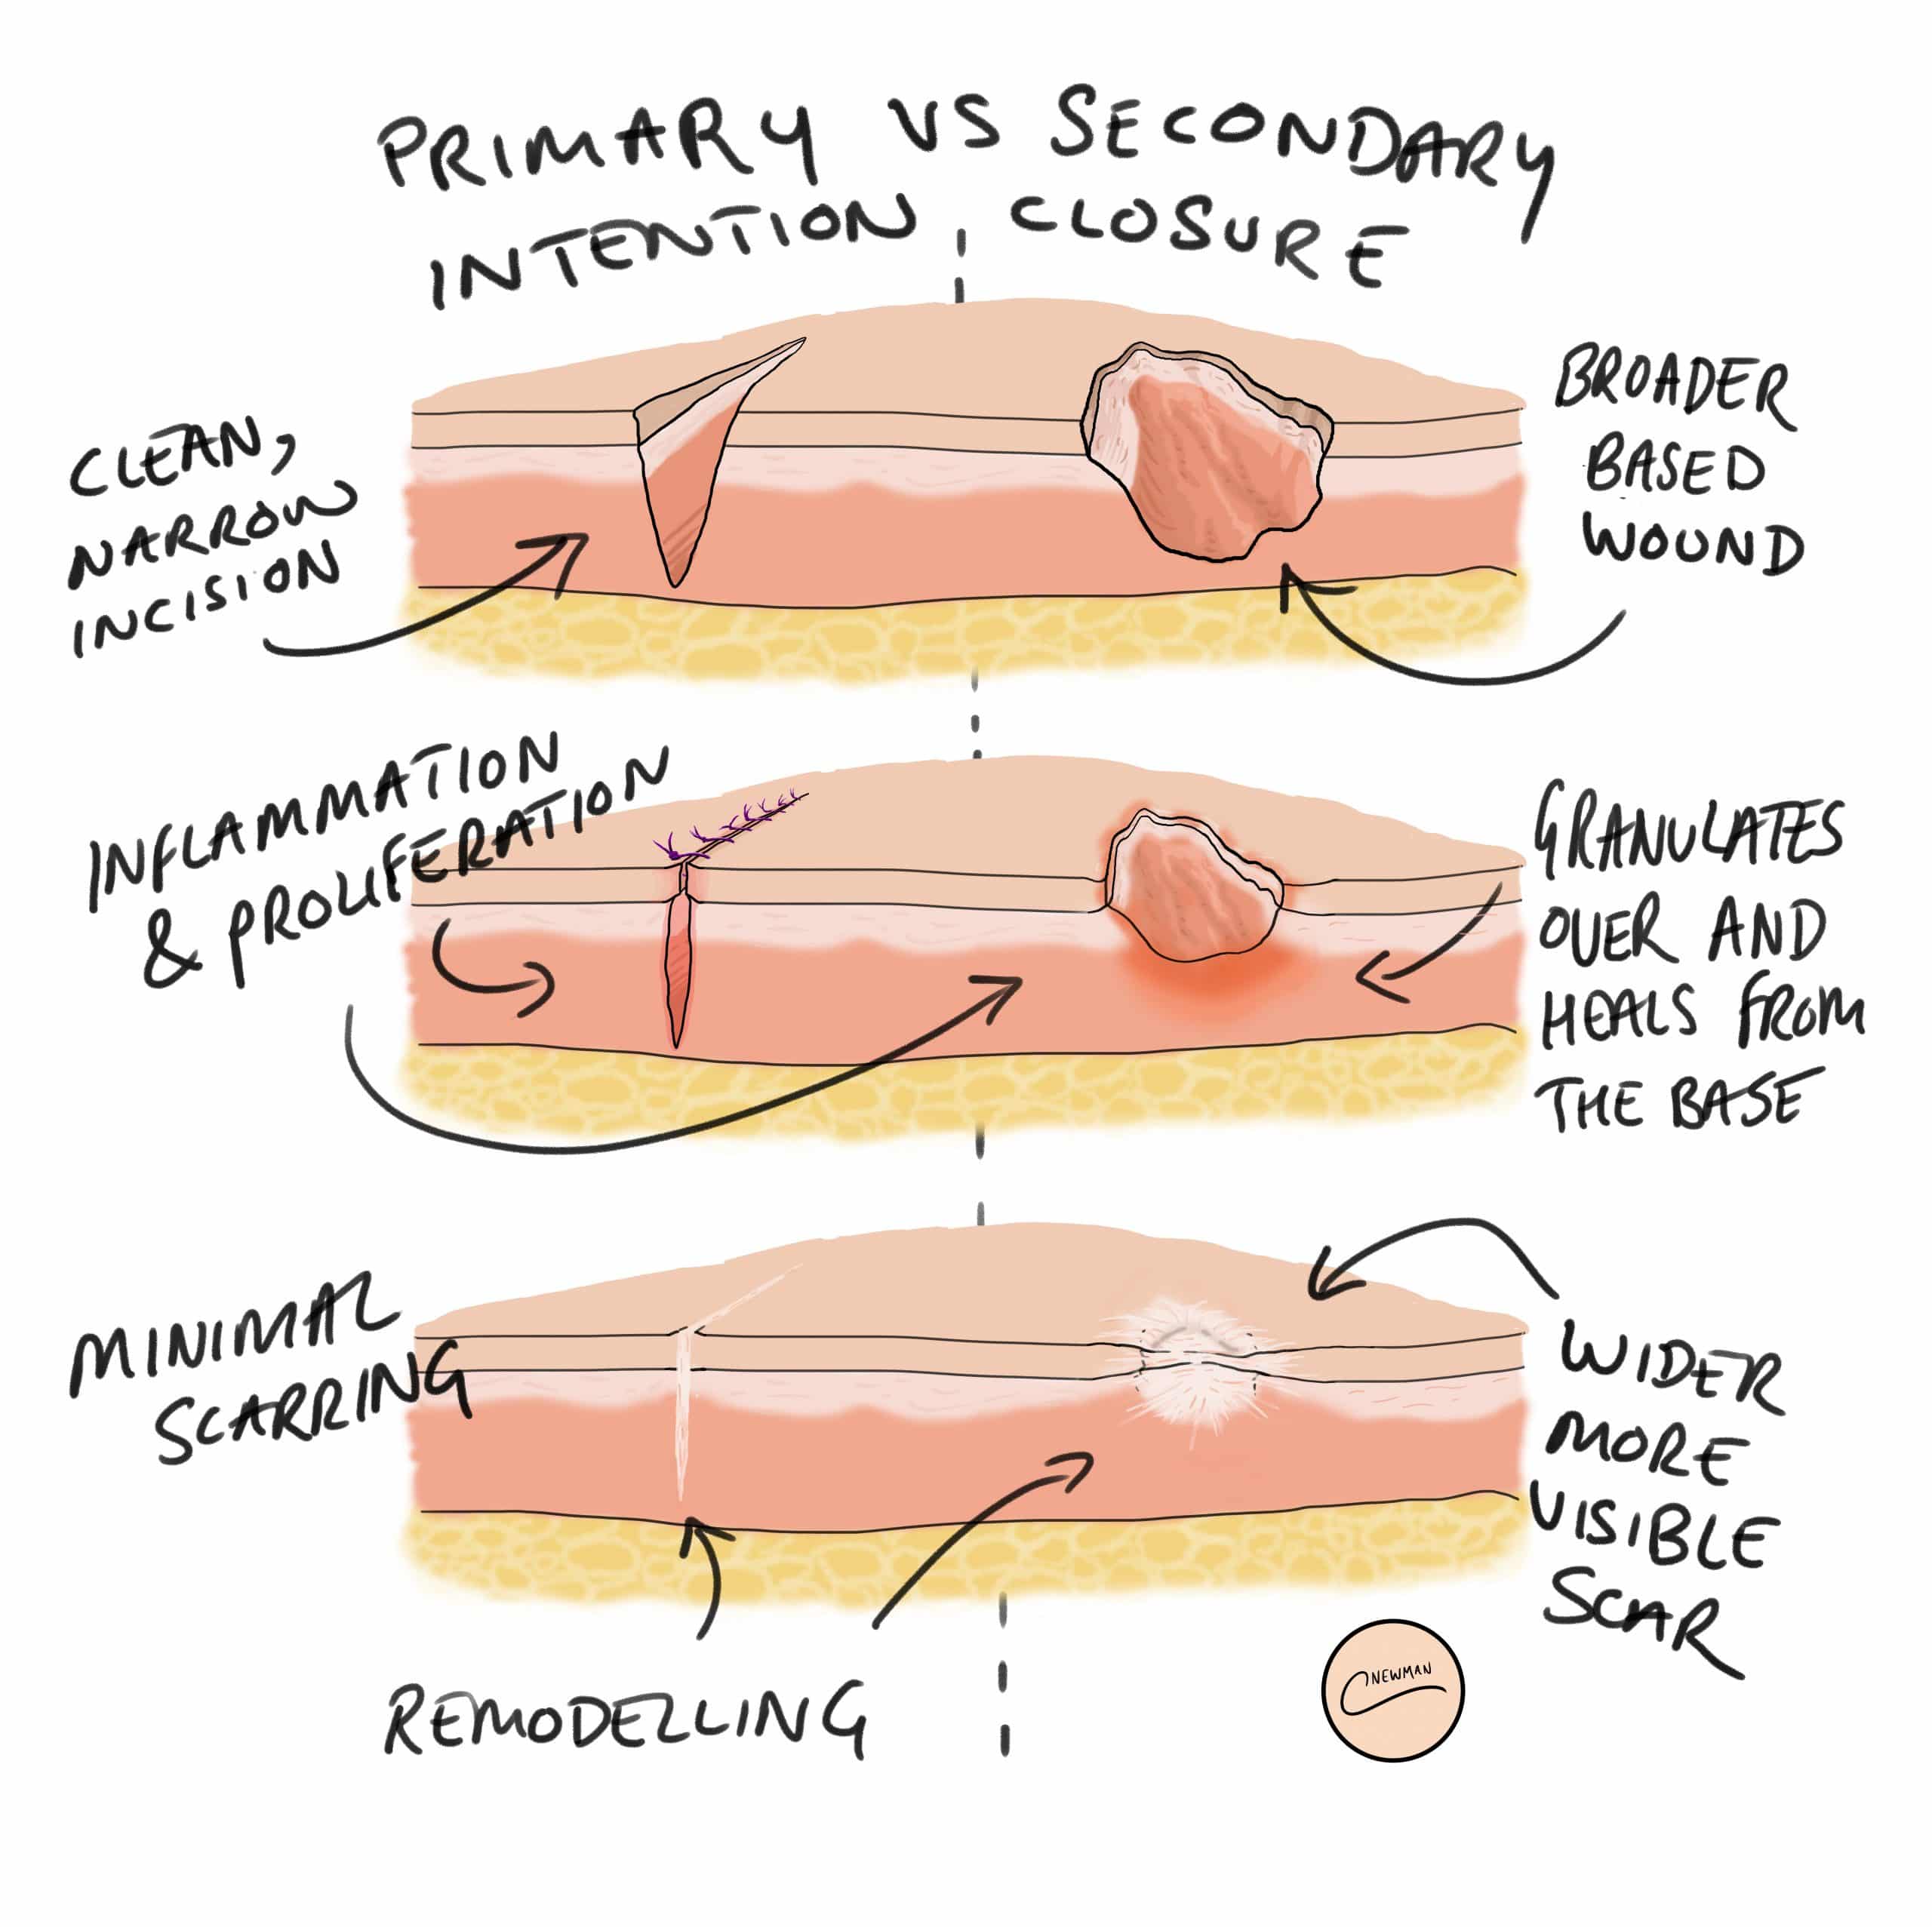 Wound Healing - Primary Intention - Secondary Intention